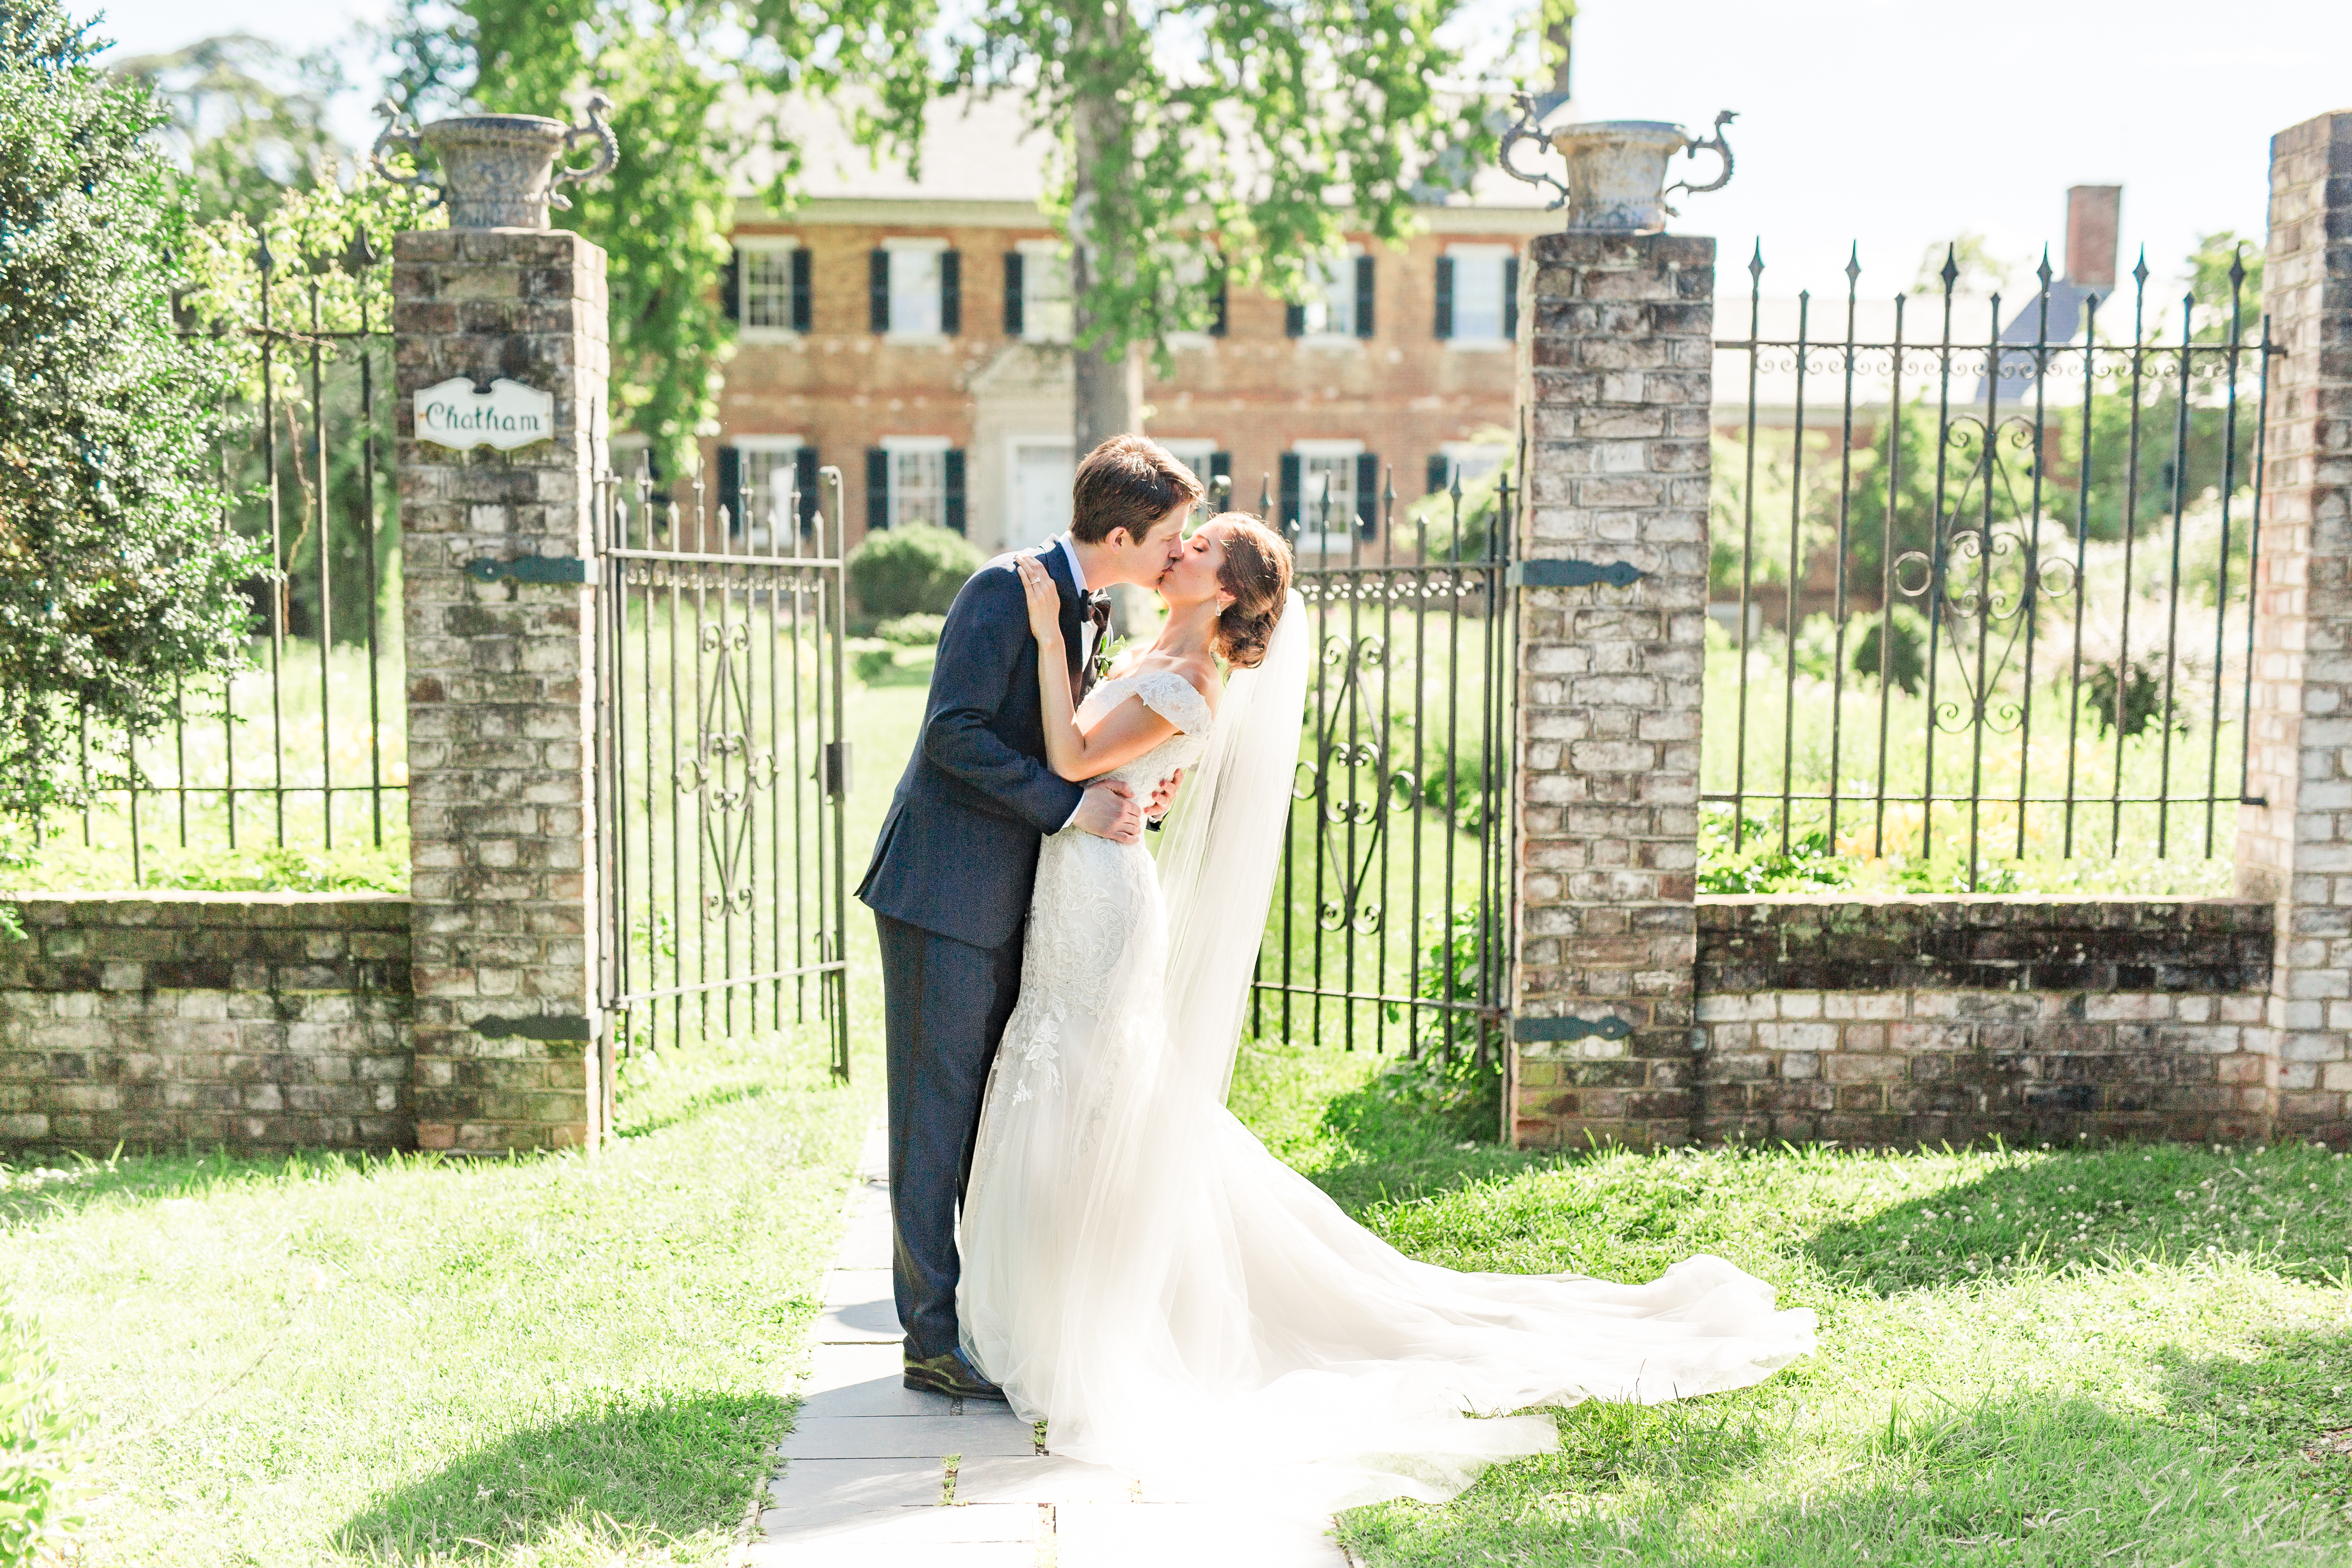 Bride and groom portraits at Chatham Manor by the front of the house near the gate